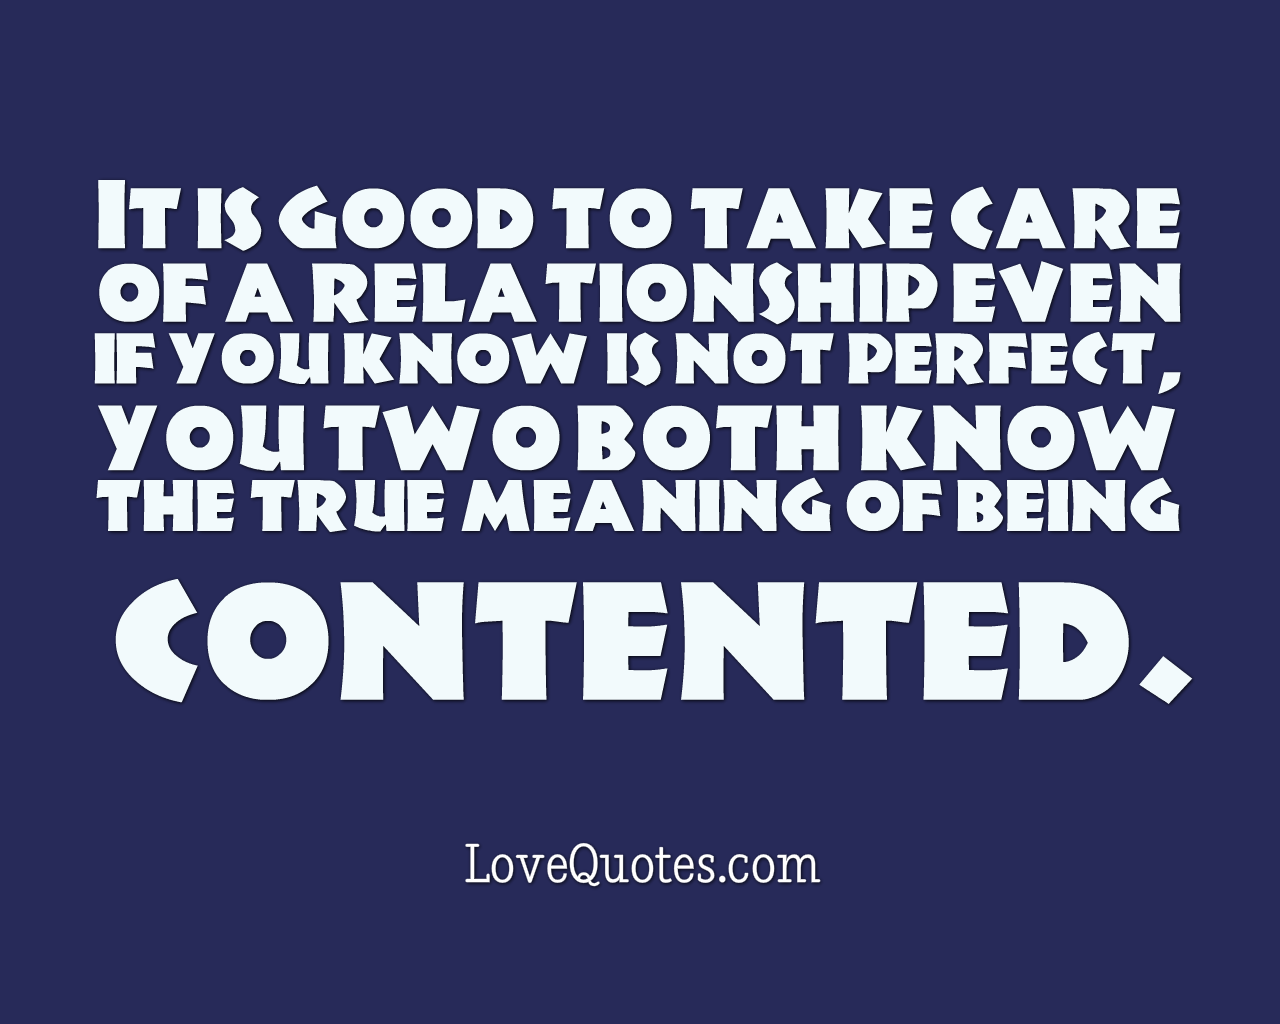 Being Contented